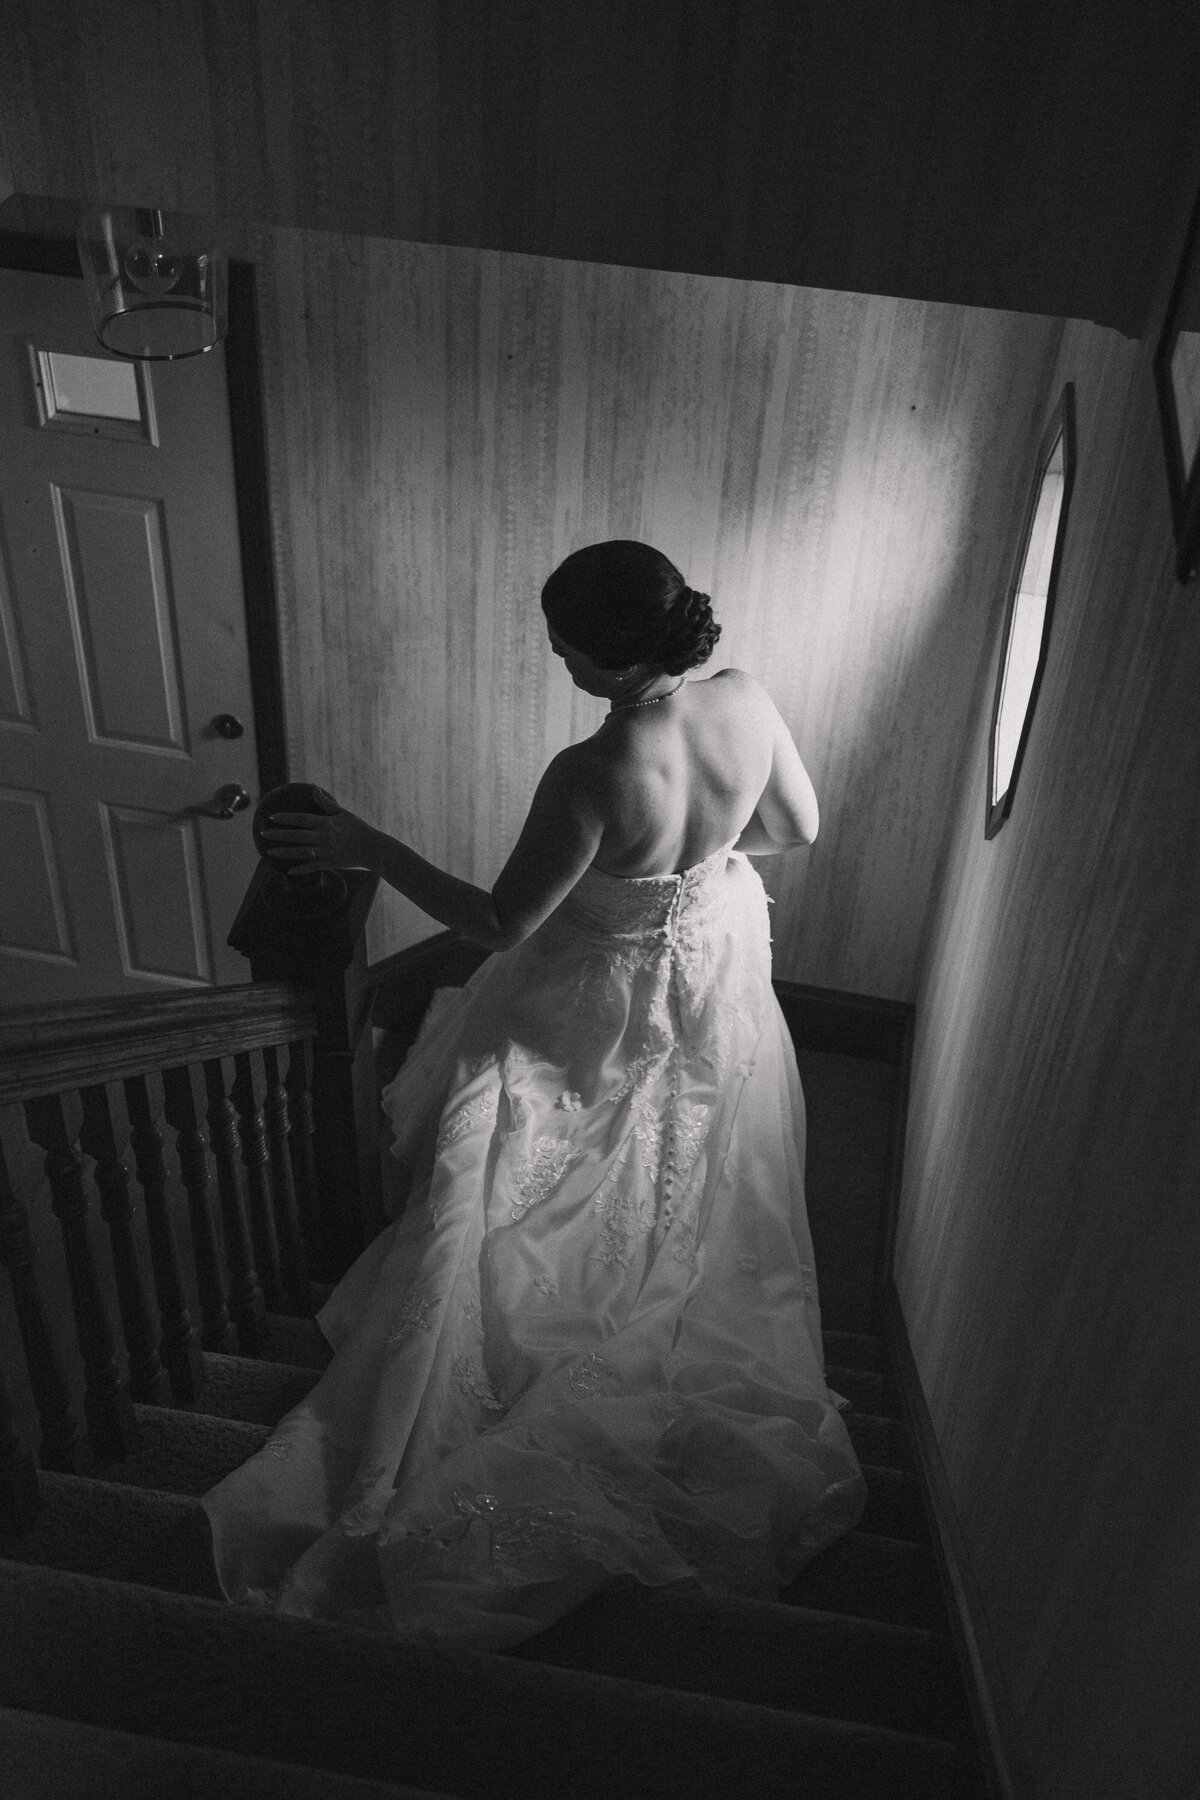 Black and white image of a bride descending a staircase in her wedding dress, captured from behind to highlight the gown's intricate details and her elegant hairstyle